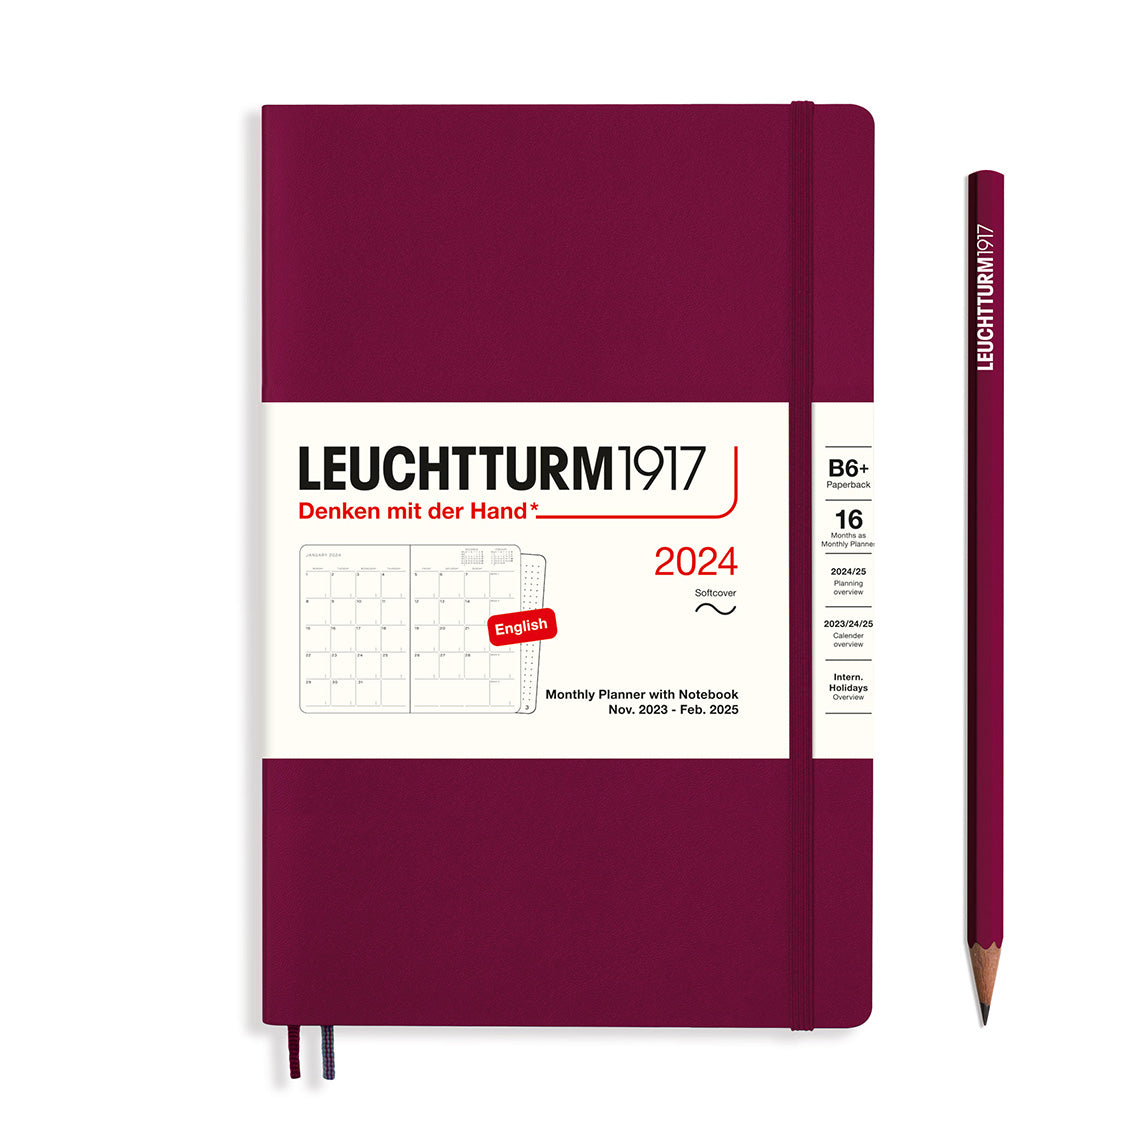 An image of a burgundy planner with a burgundy elastic band holding it together and a cream paper wrap around the middle stating the business name Leuchtturm1917, that it is for the year 2024, it is a monthly planner with notebook, is B6+ in size, soft cover and an English language version. It has an image on the wrap showing the inside layout which is a month across 2 pages. A burgundy pencil is shown at the side of the planner.